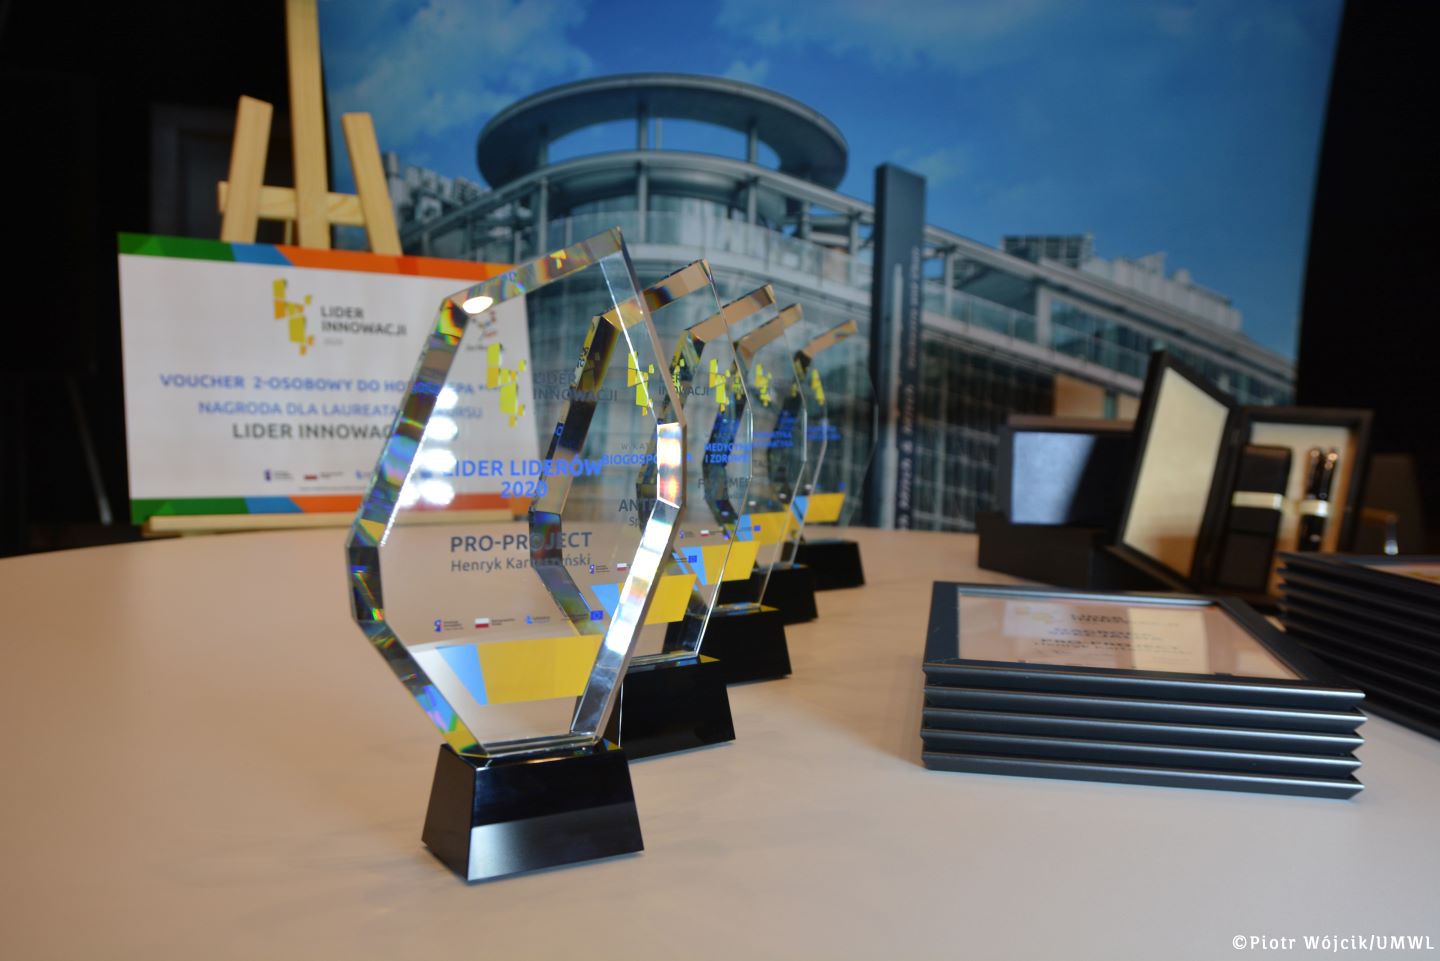 Innovative energy projects awarded in Lublin, PL